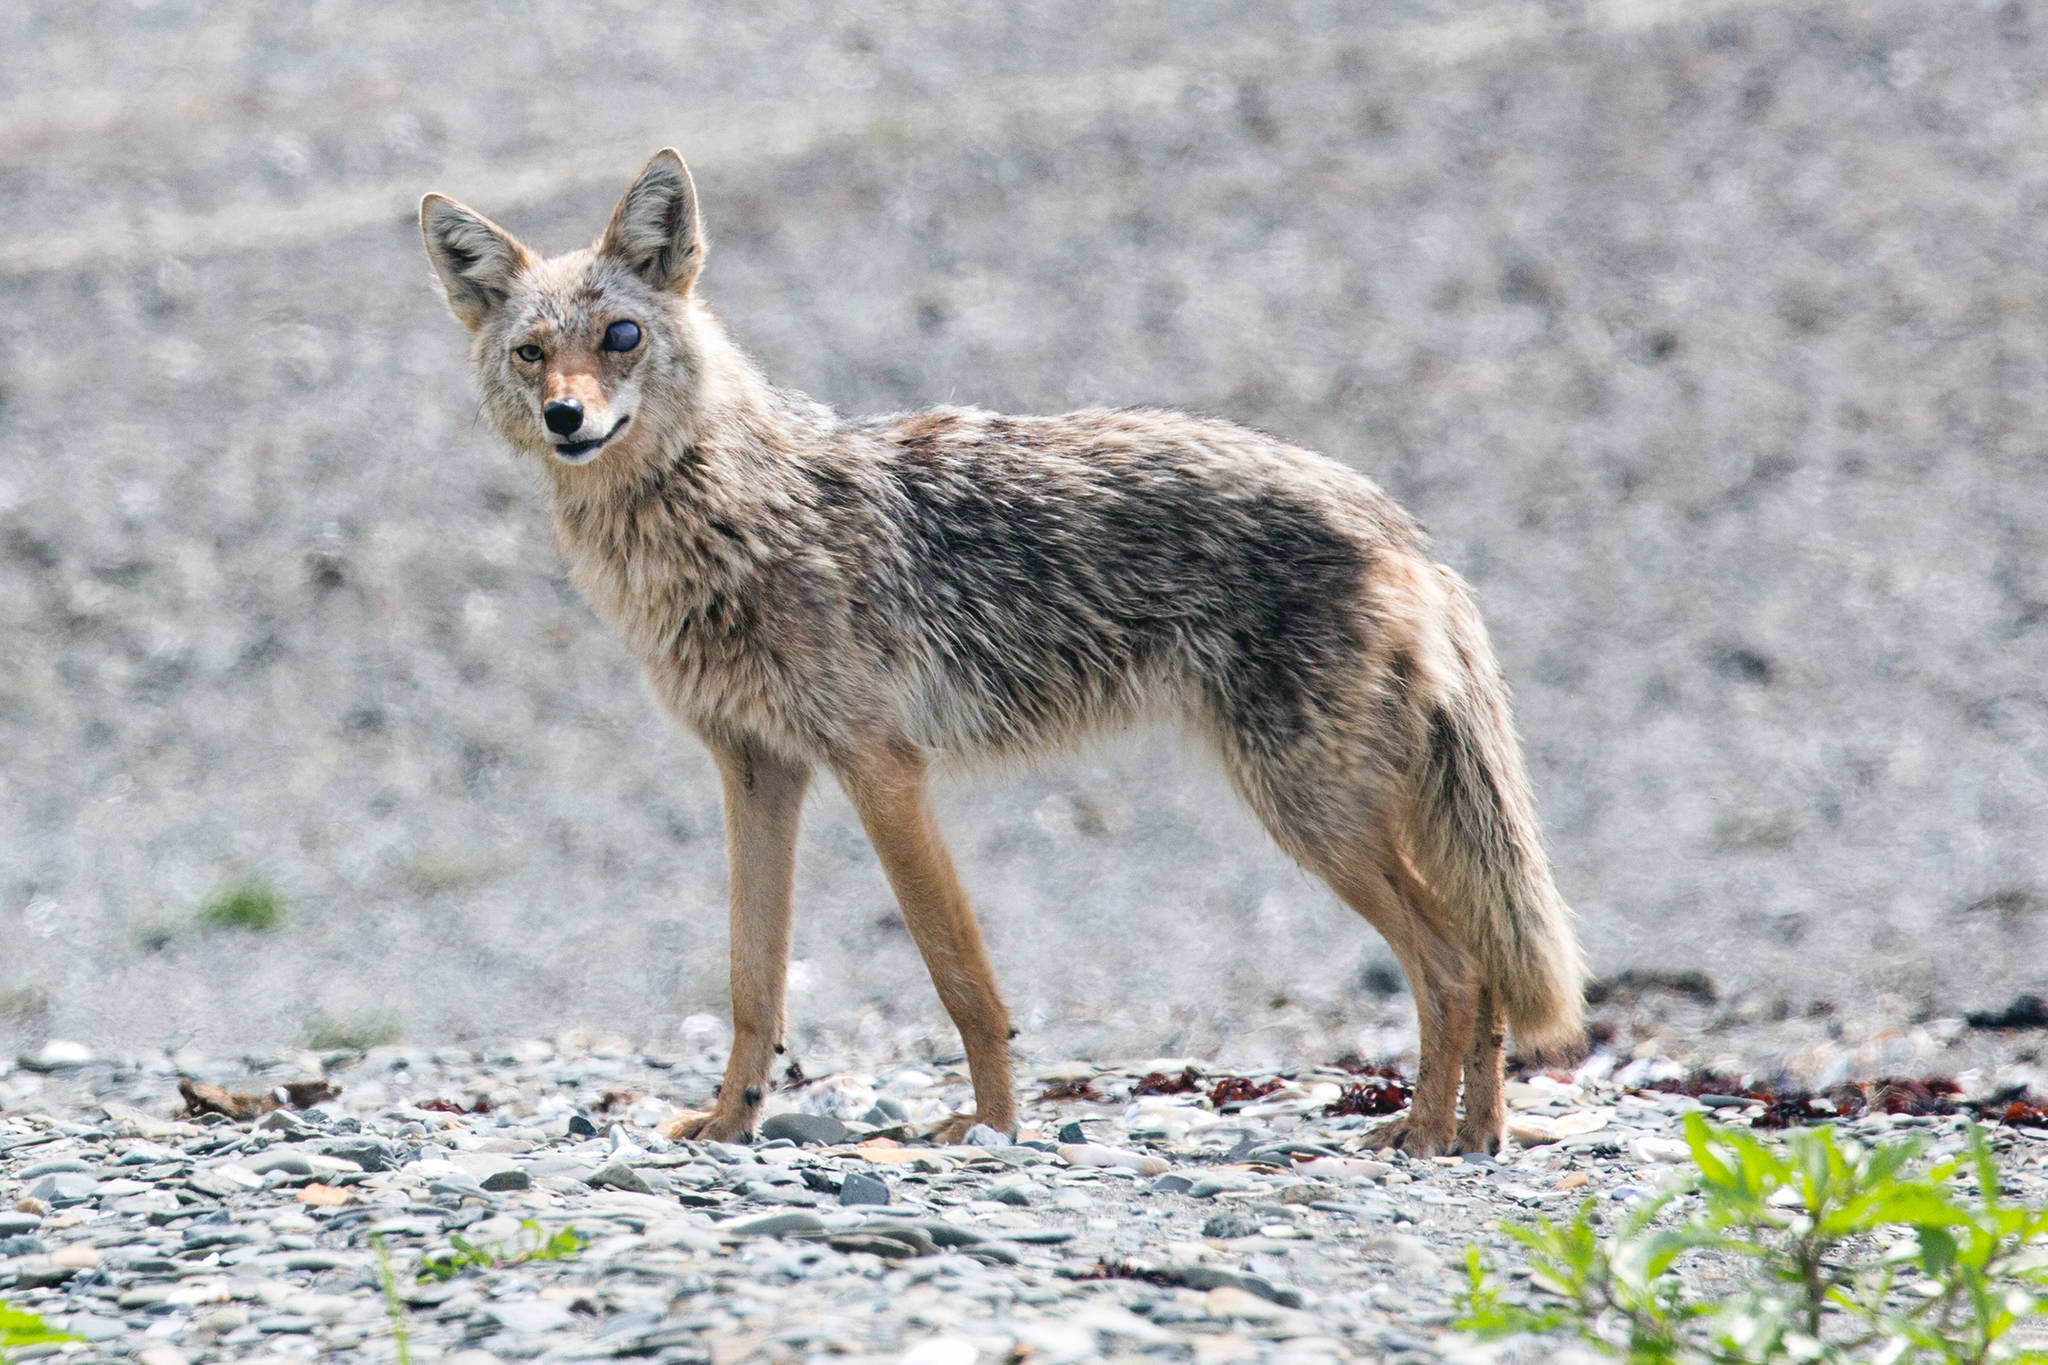 A coyote is seen on a beach near Excursion Inlet on June 8, 2019. The eye trauma may have been the result of a tangle with a porcupine, the photographer guessed. (Courtesy Photo | Jack Beedle)